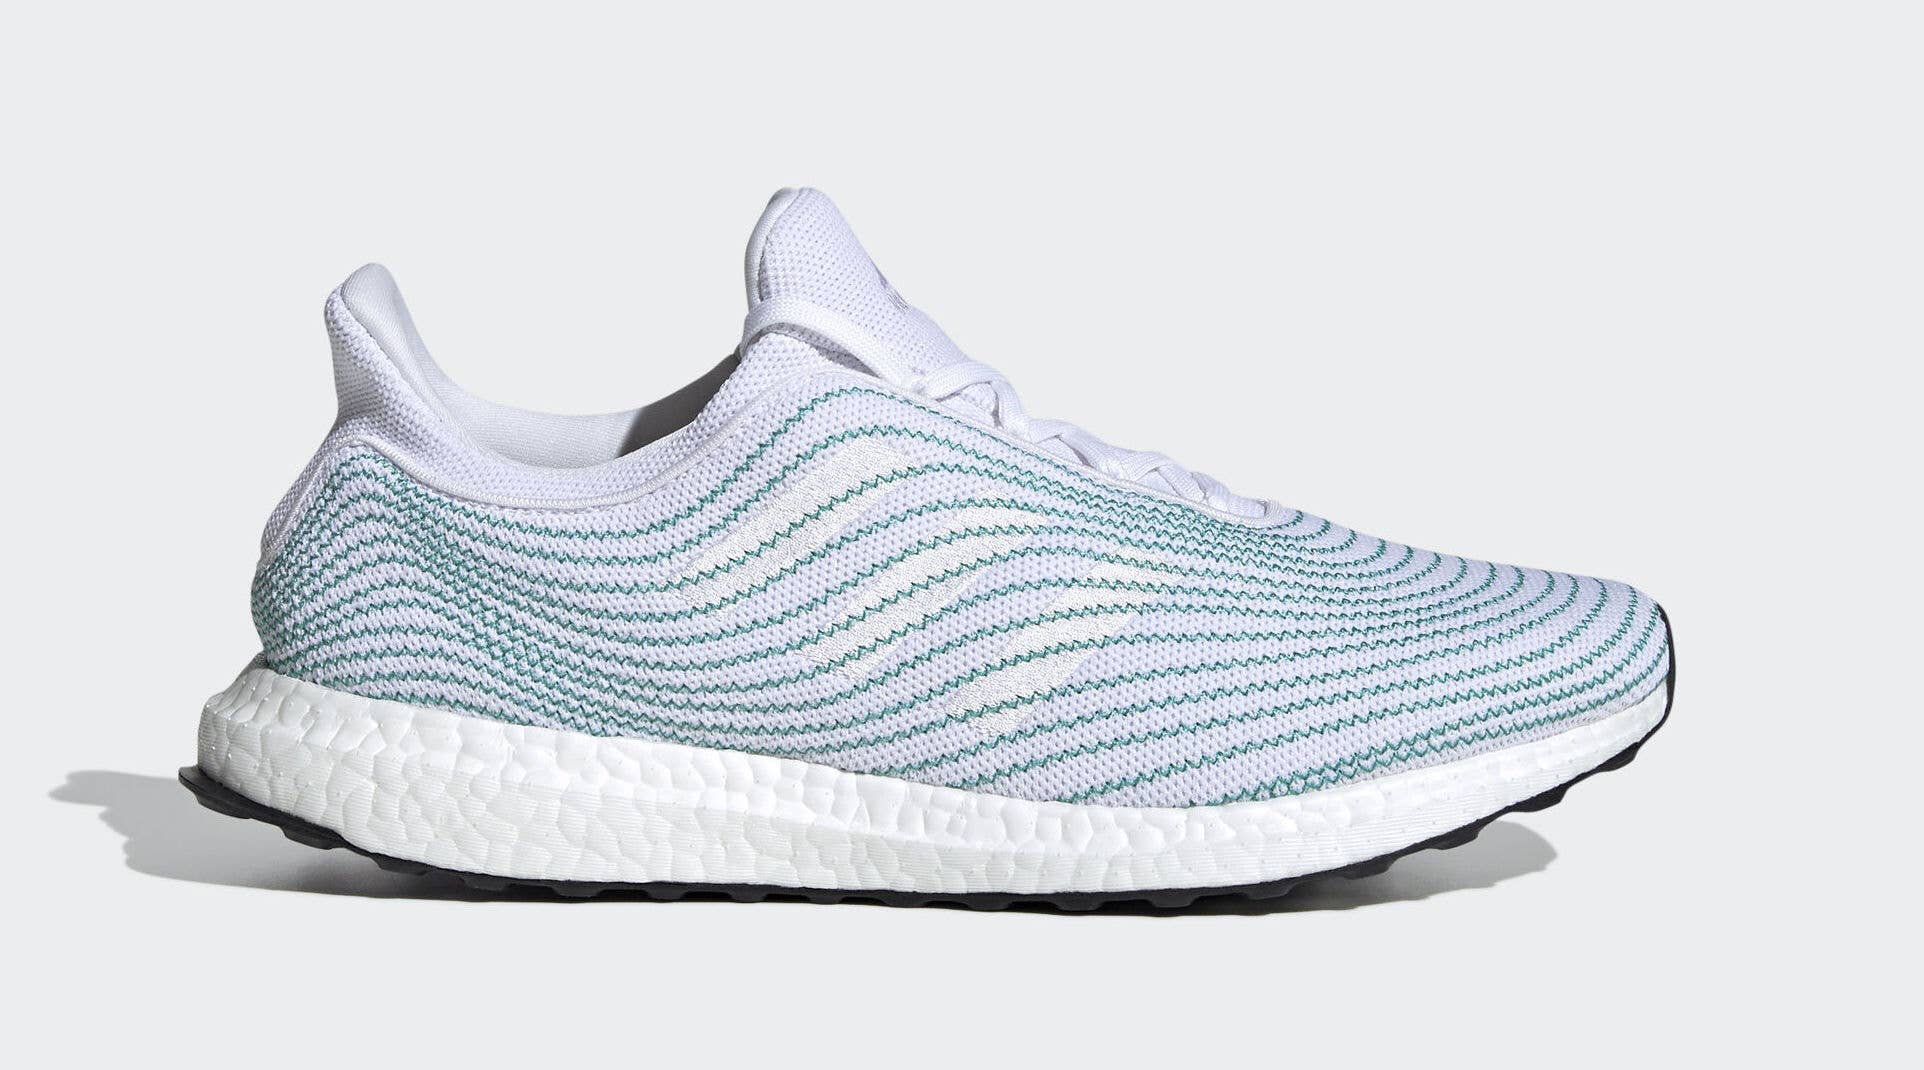 verder residentie Omdat This Parley x Adidas Ultra Boost Uncaged Looks Familiar | Complex